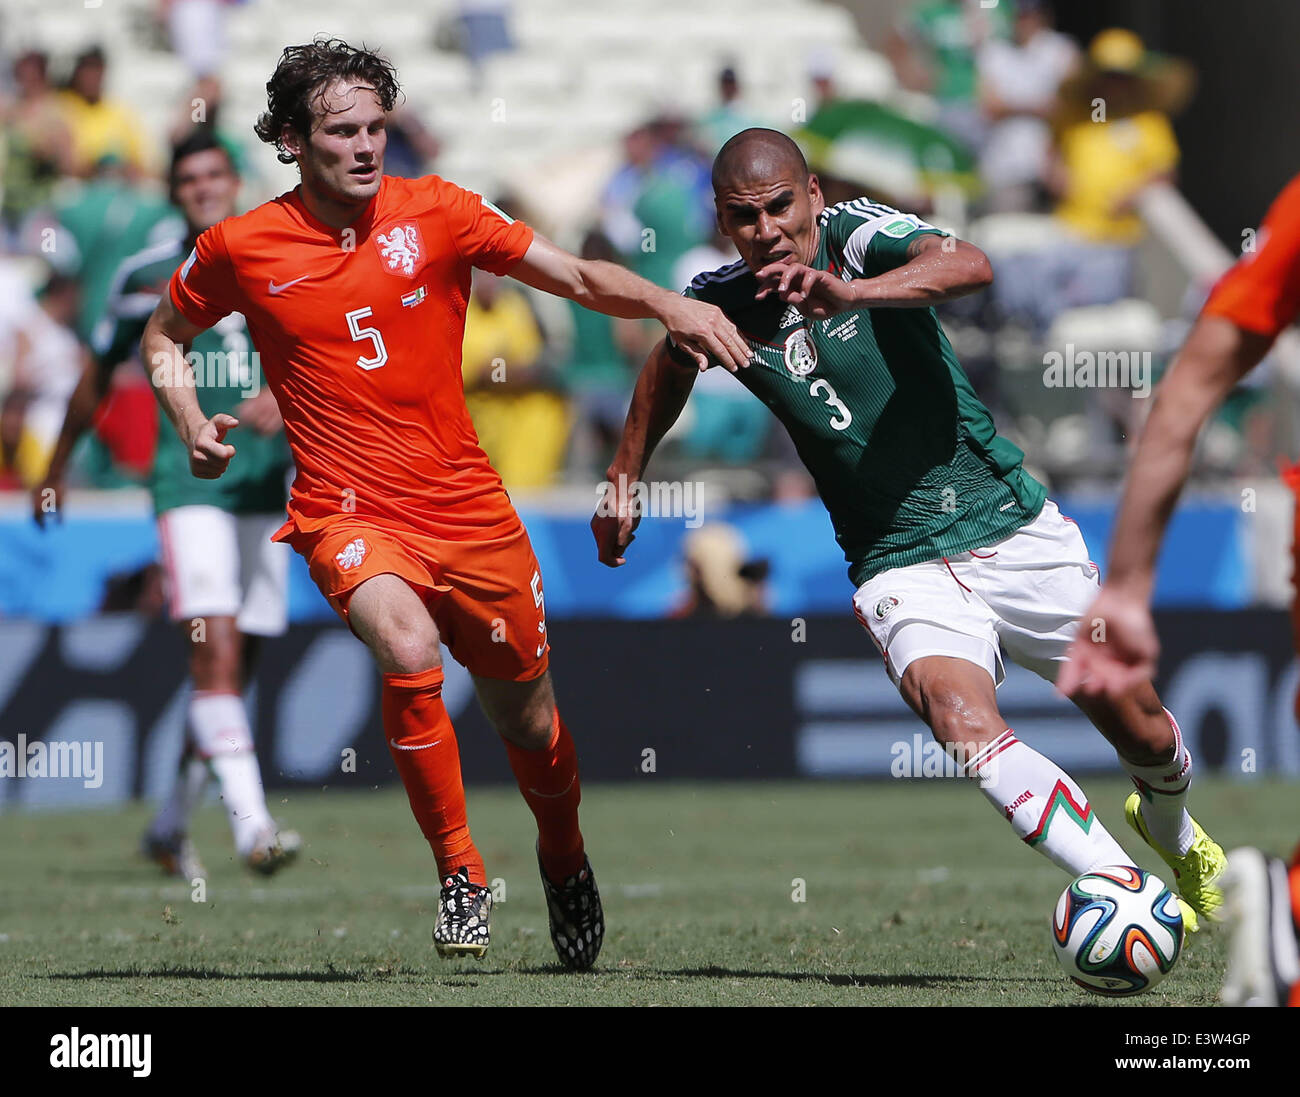 Fortaleza, Brazil. 29th June, 2014. Mexico's Carlos Salcido vies with Netherlands's Daley Blind during a Round of 16 match between Netherlands and Mexico of 2014 FIFA World Cup at the Estadio Castelao Stadium in Fortaleza, Brazil, on June 29, 2014. Credit:  Zhou Lei/Xinhua/Alamy Live News Stock Photo